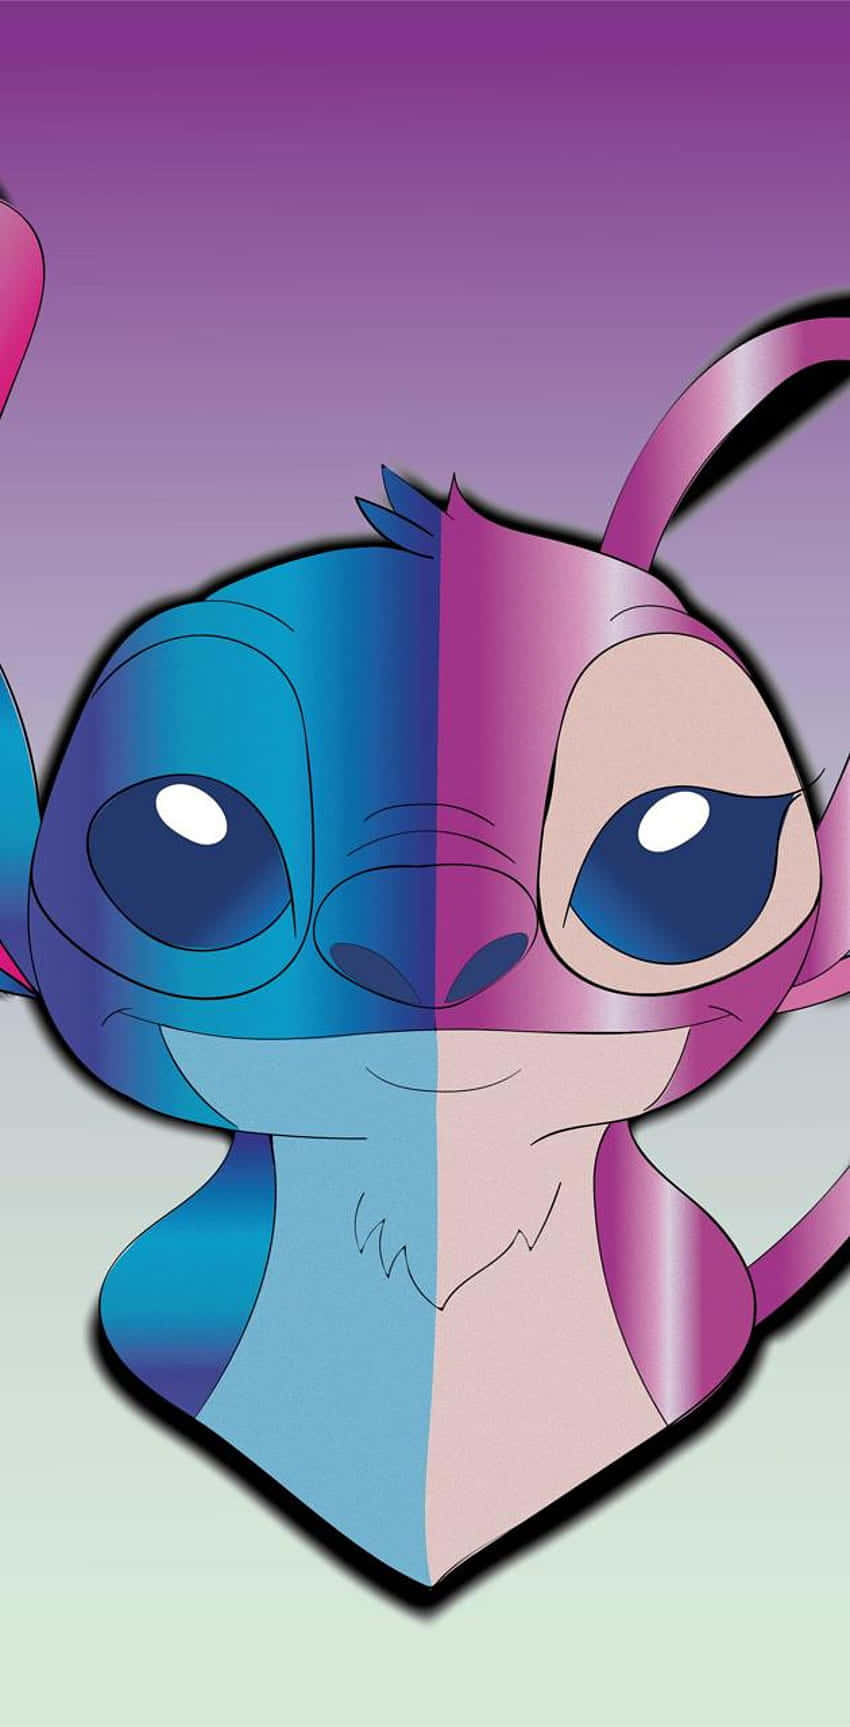 7 Stitch and Angel aesthetic ideas  stitch and angel stitch drawing  cute disney drawings